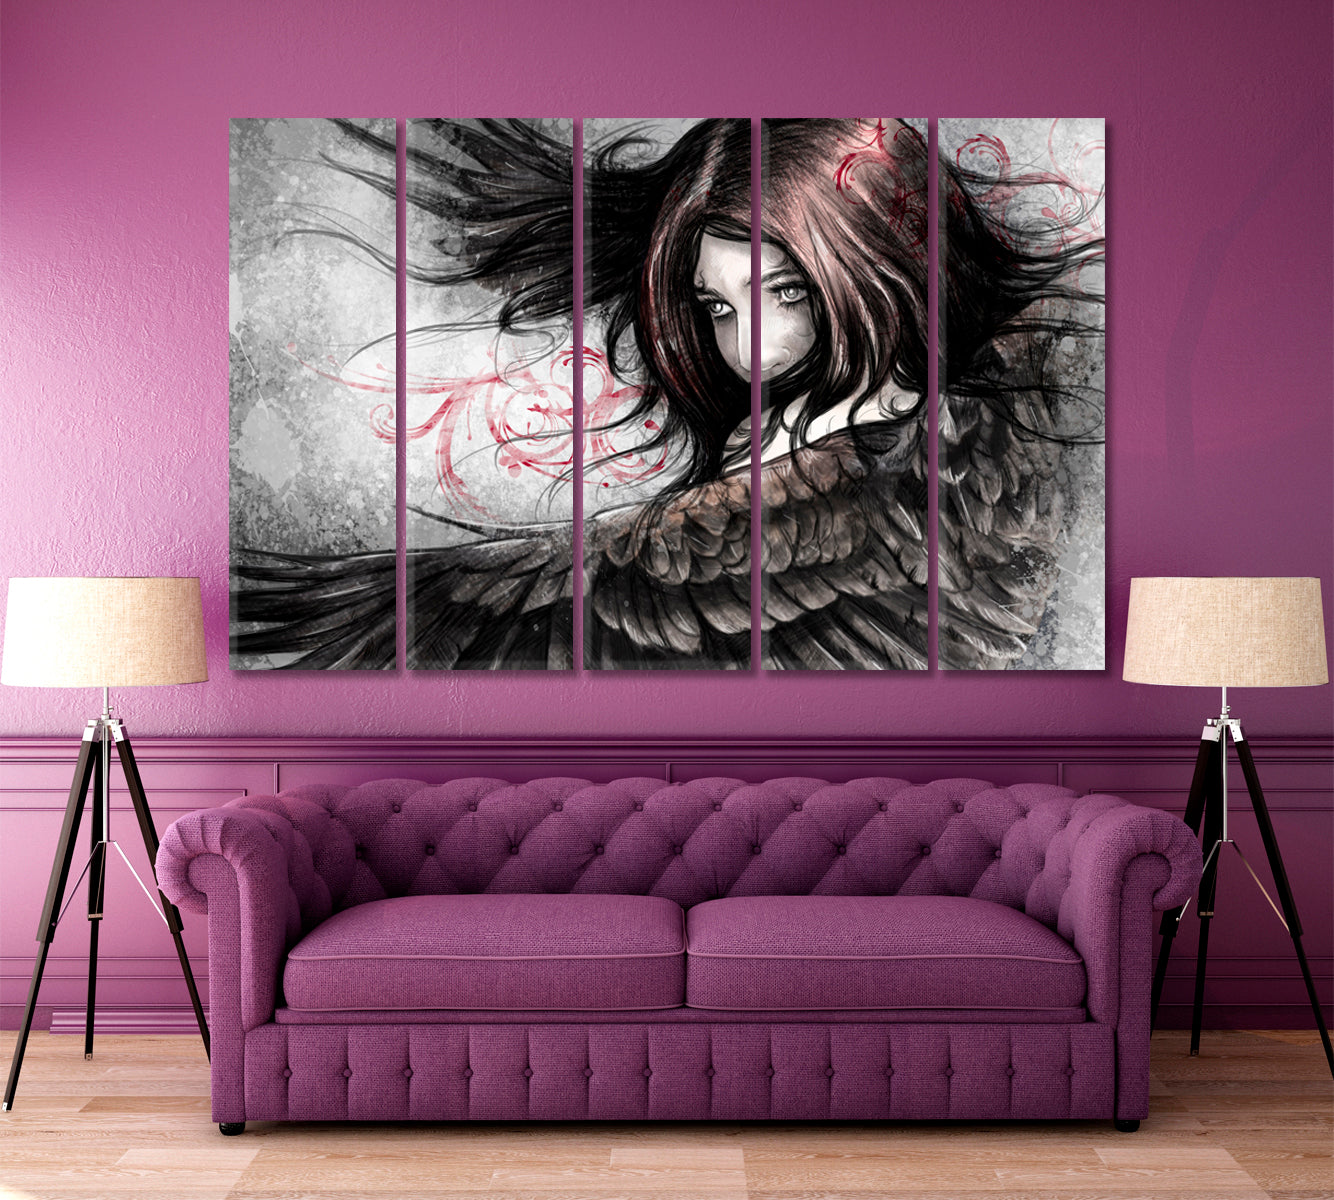 BEAUTIFUL ANGEL Girl with Eagle Wings Fantasy Concept TV, Cartoons Wall Art Canvas Artesty 5 panels 36" x 24" 